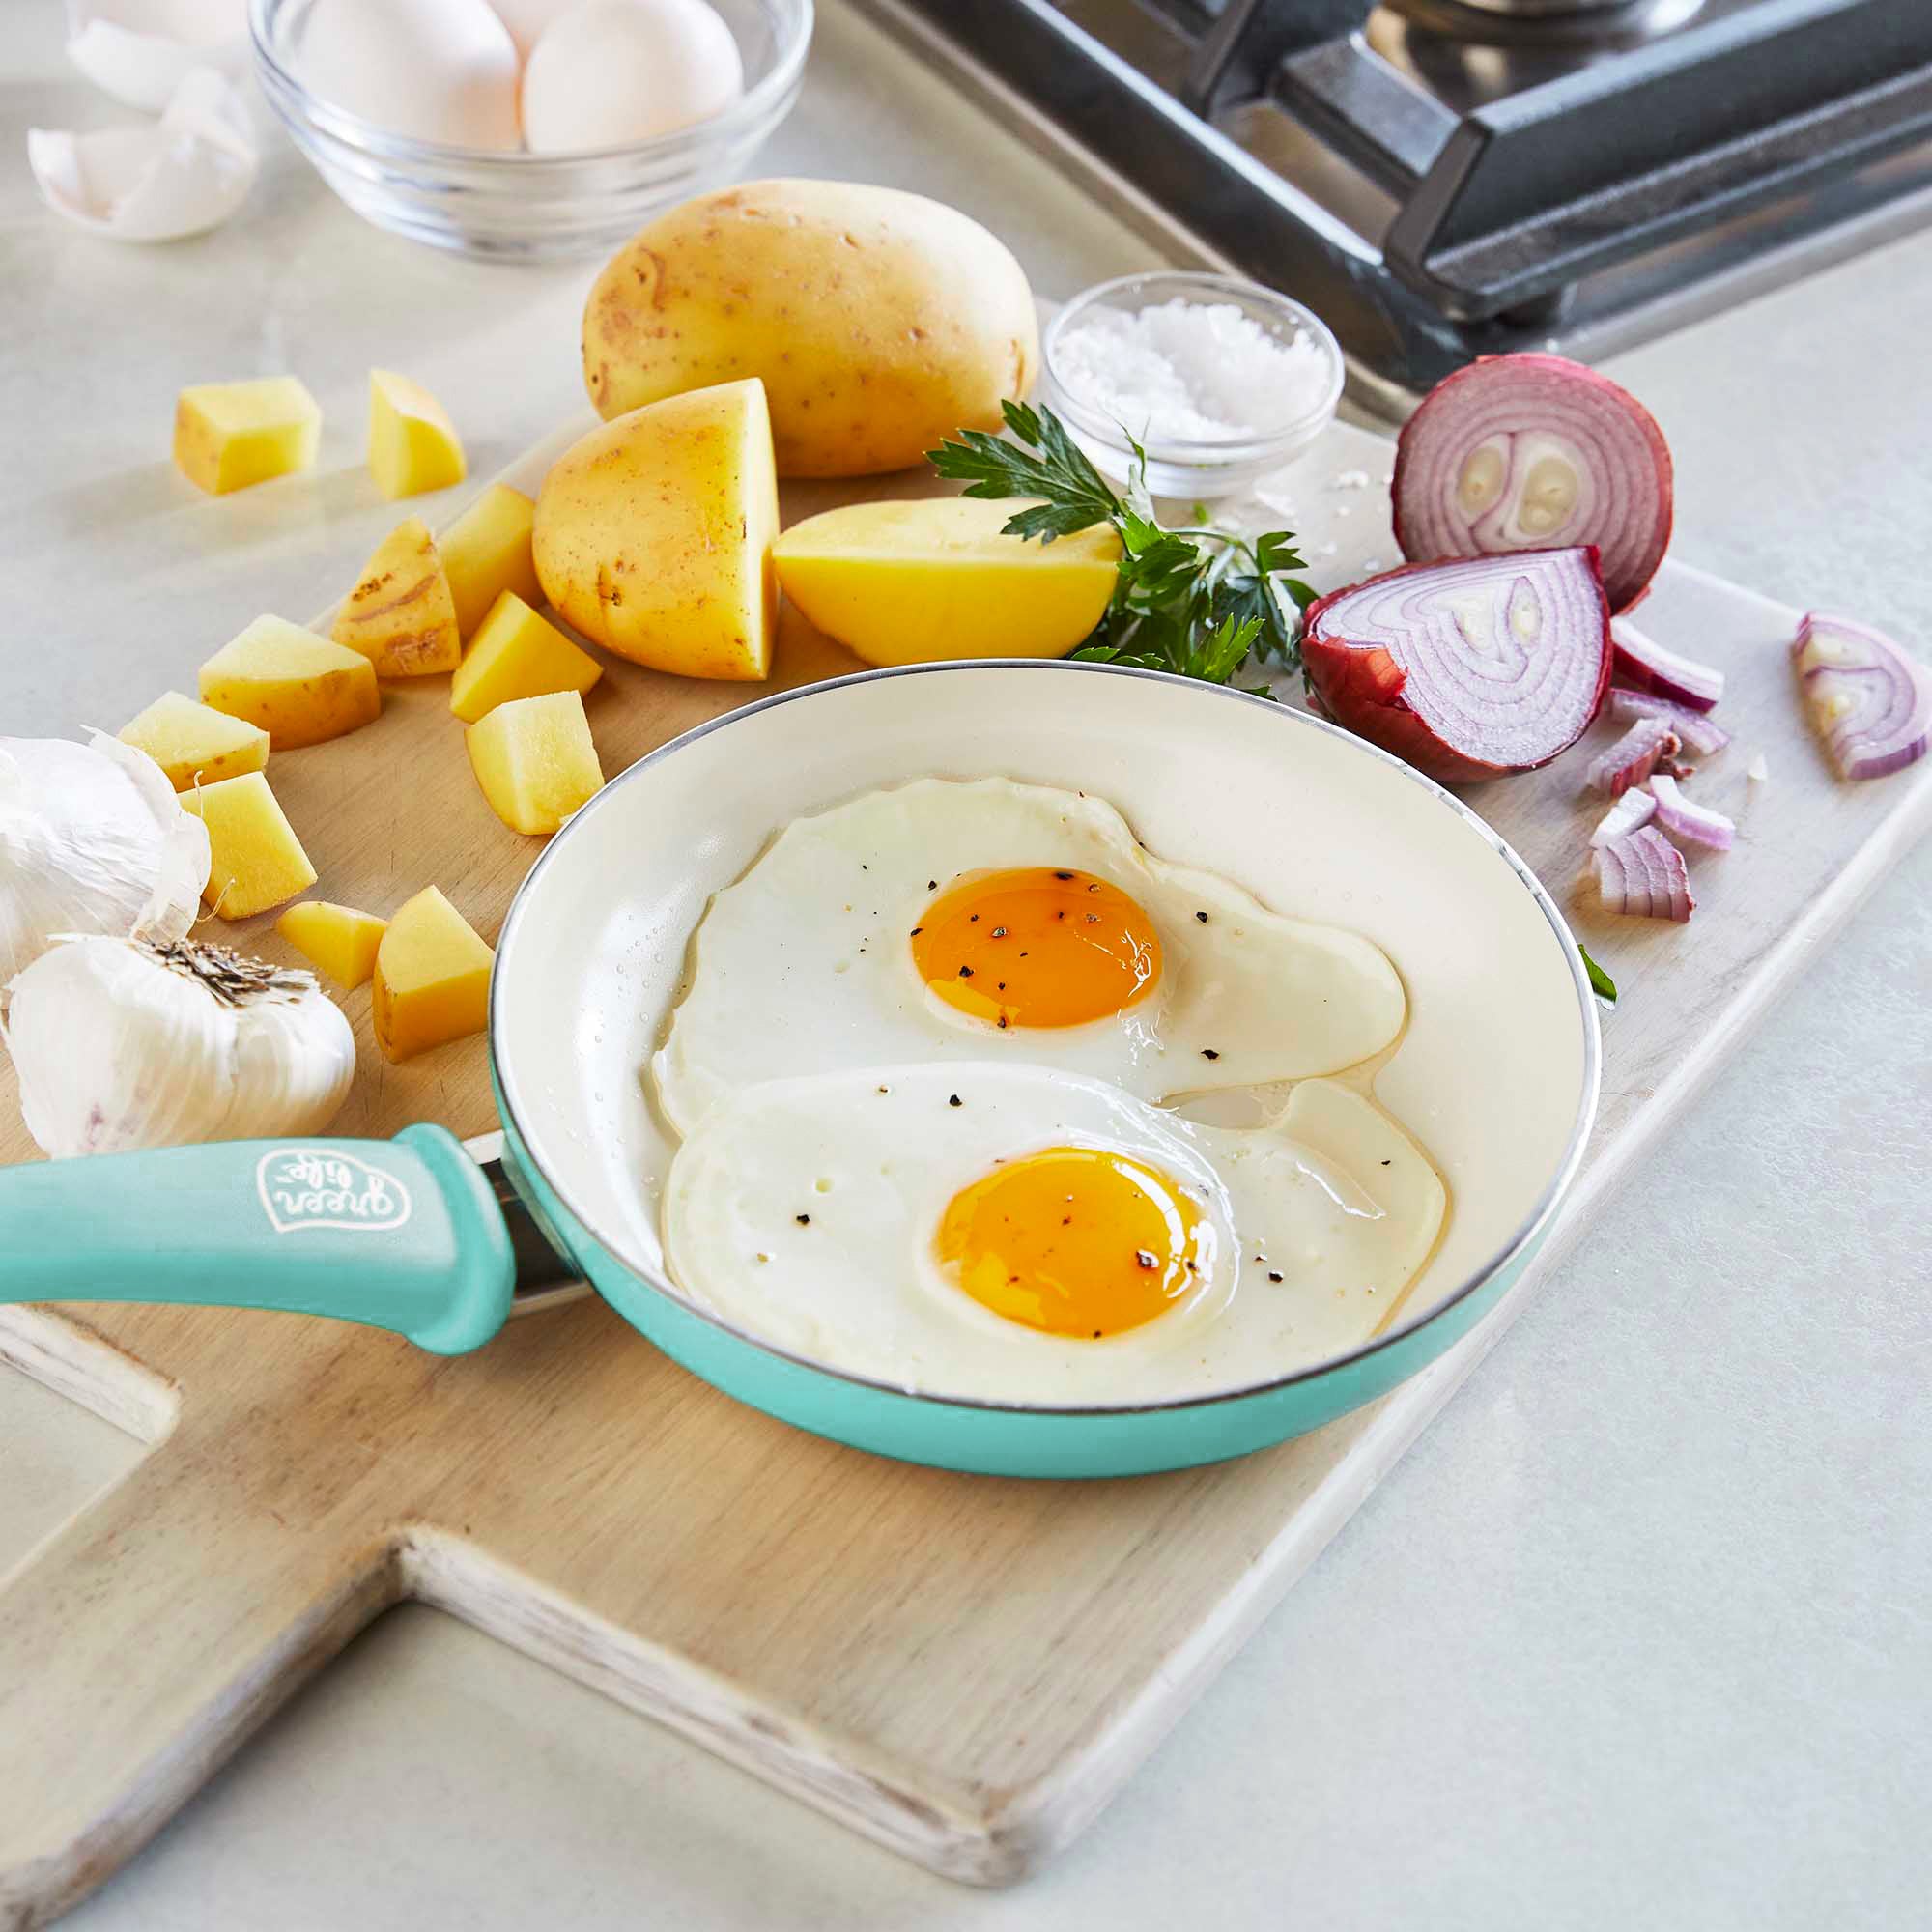 8 Inch Frying Pan with Ceramic Coating Nonstick pan Fried Egg Beef Skillets  Induction Cooker Oven Heating Kitchen Pan Cookware